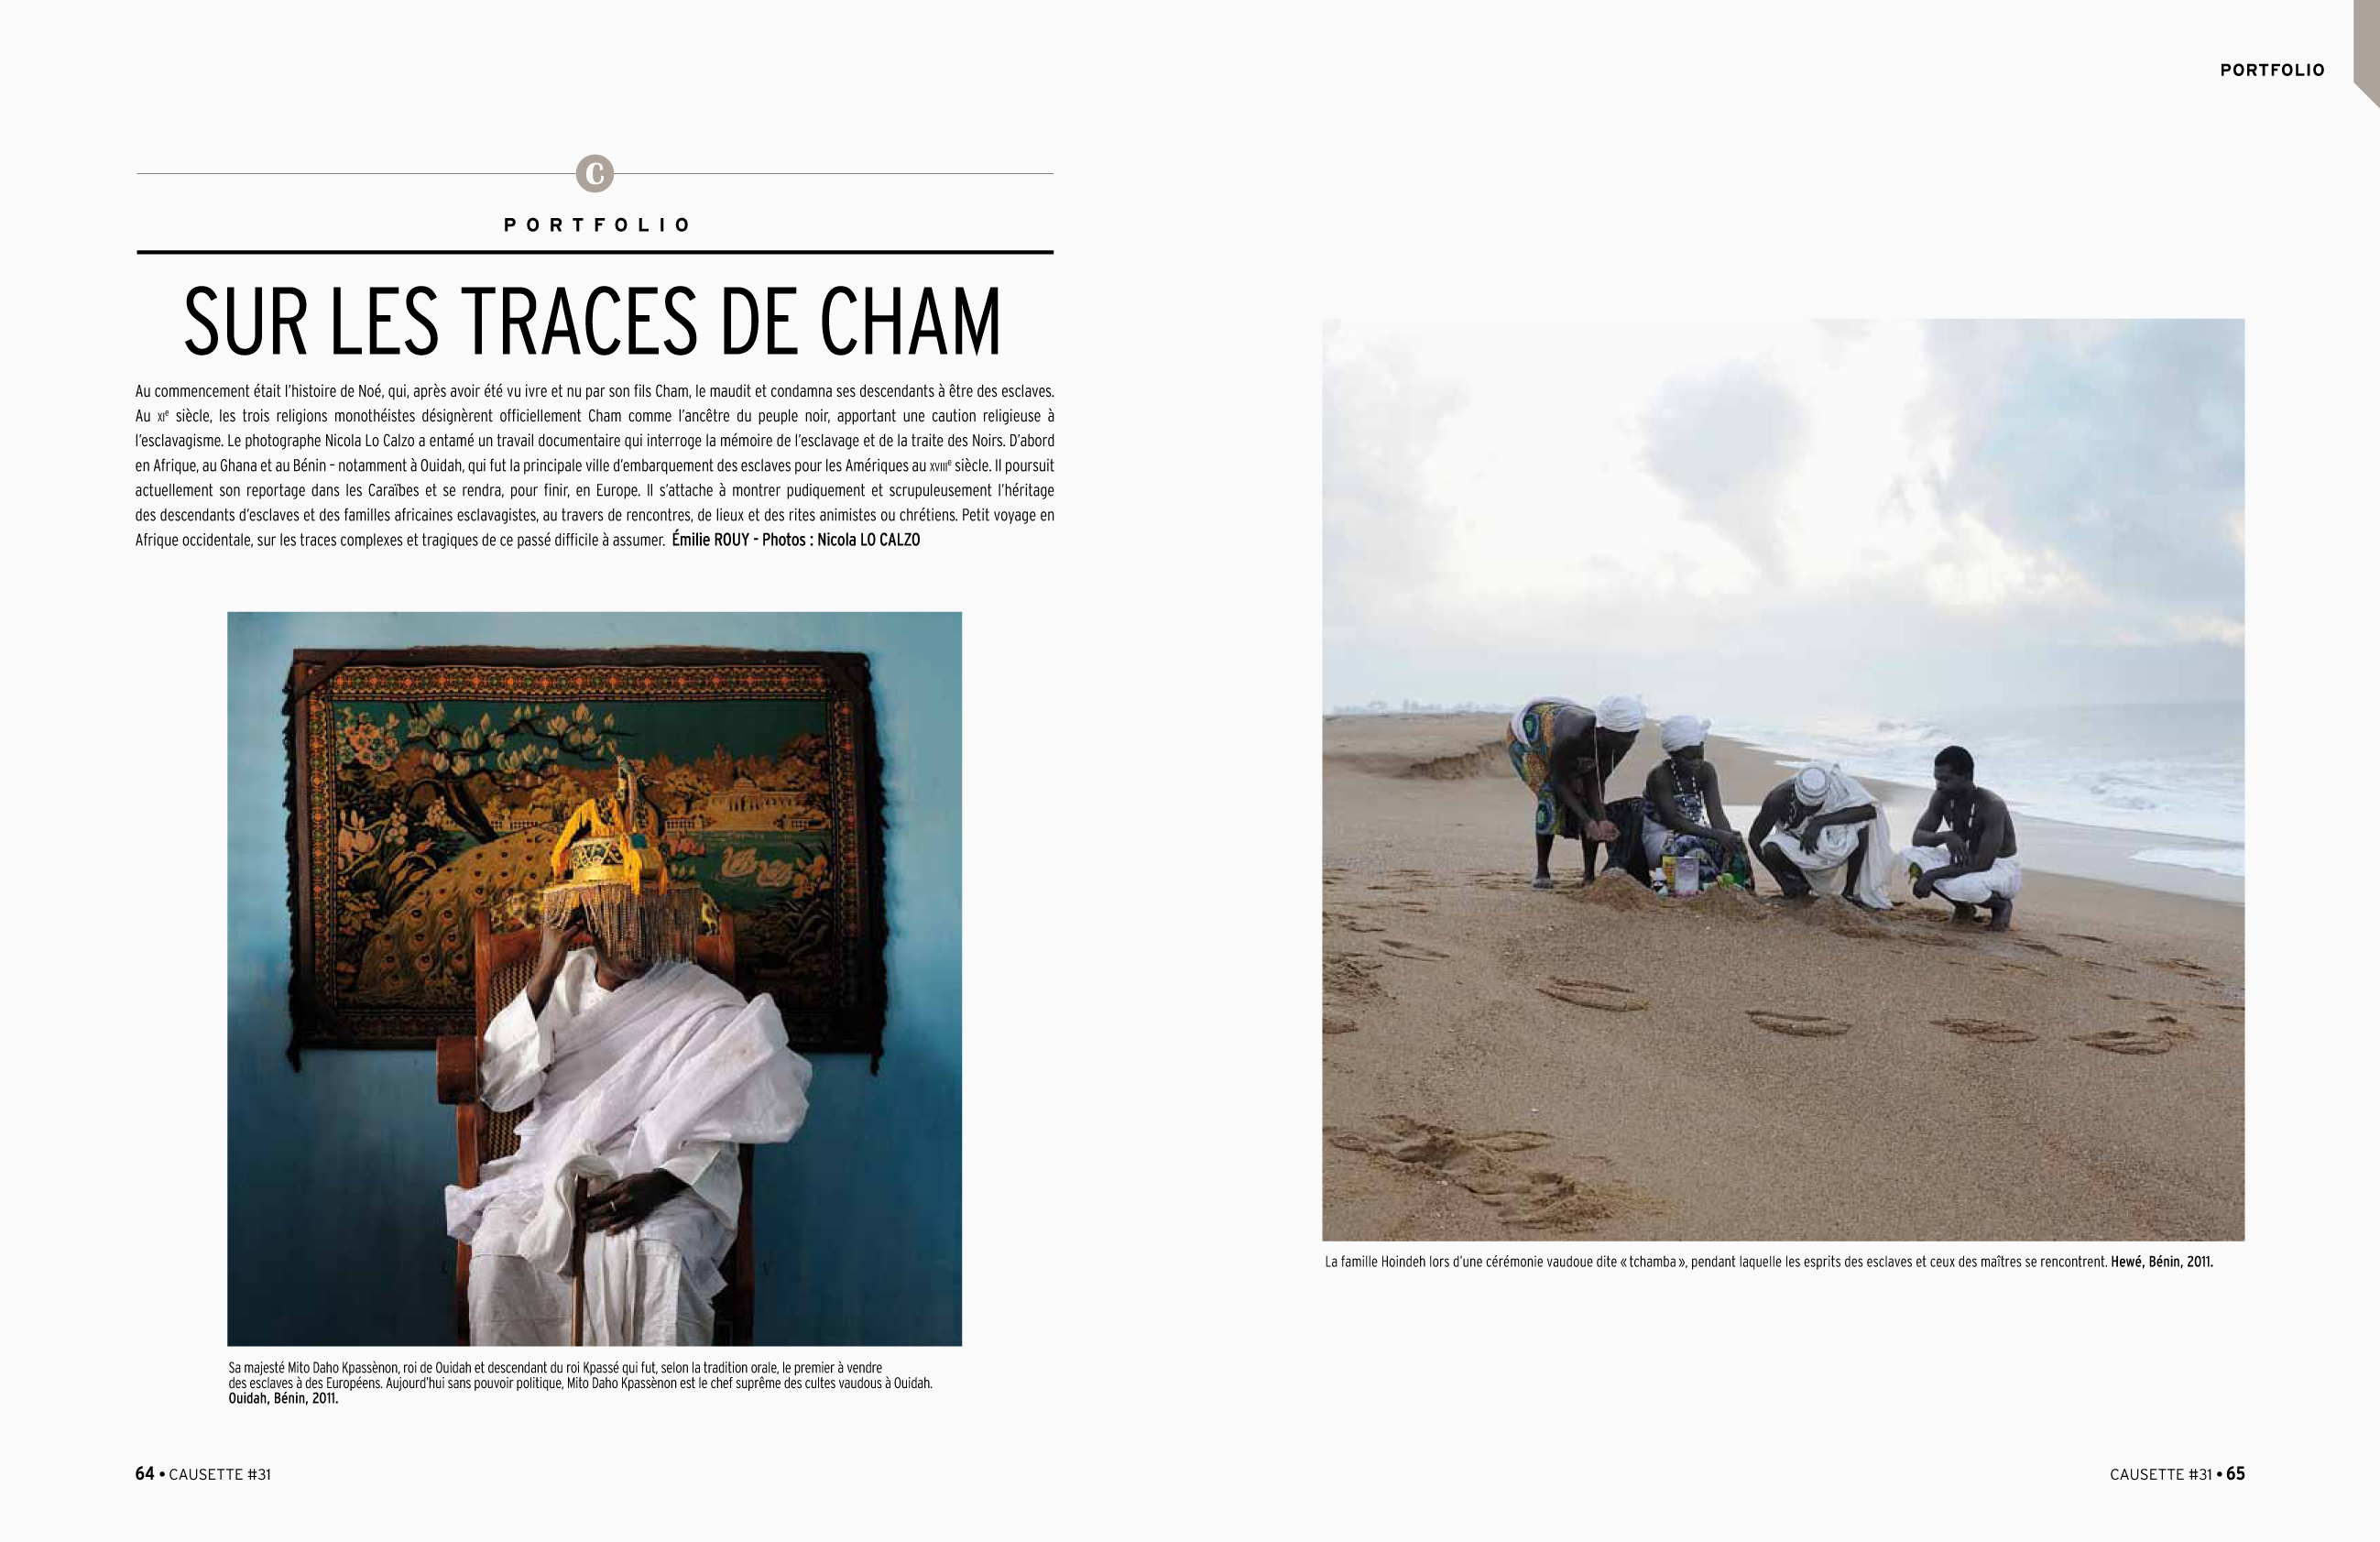 Cham published in Causette